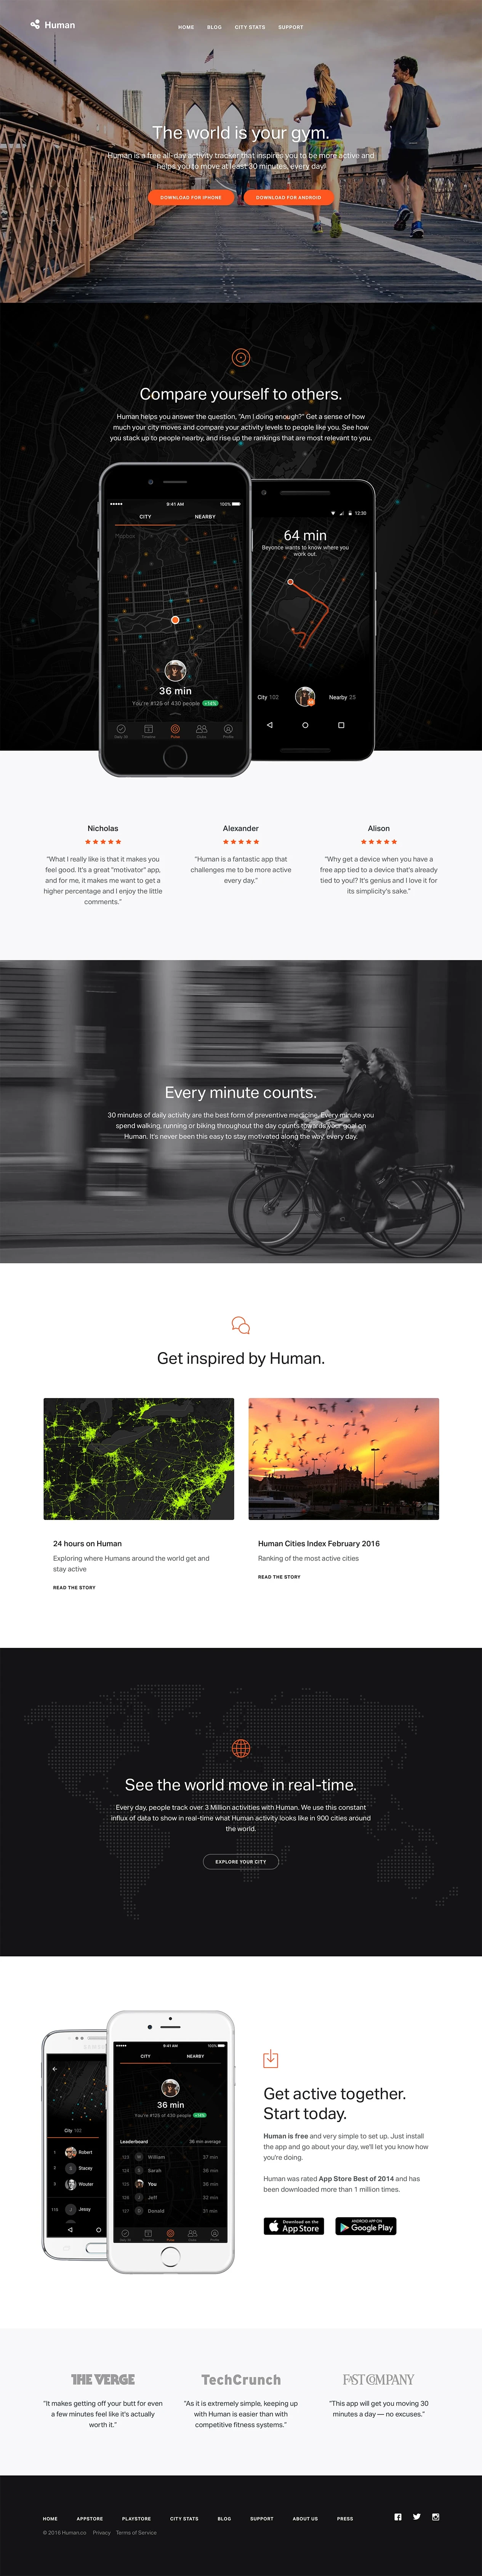 Human.co Landing Page Example: Human is a free all-day activity tracker that inspires you to be more active and helps you to move at least 30 minutes, every day. Track your everyday activity with Human and compare yourself with other people like you.